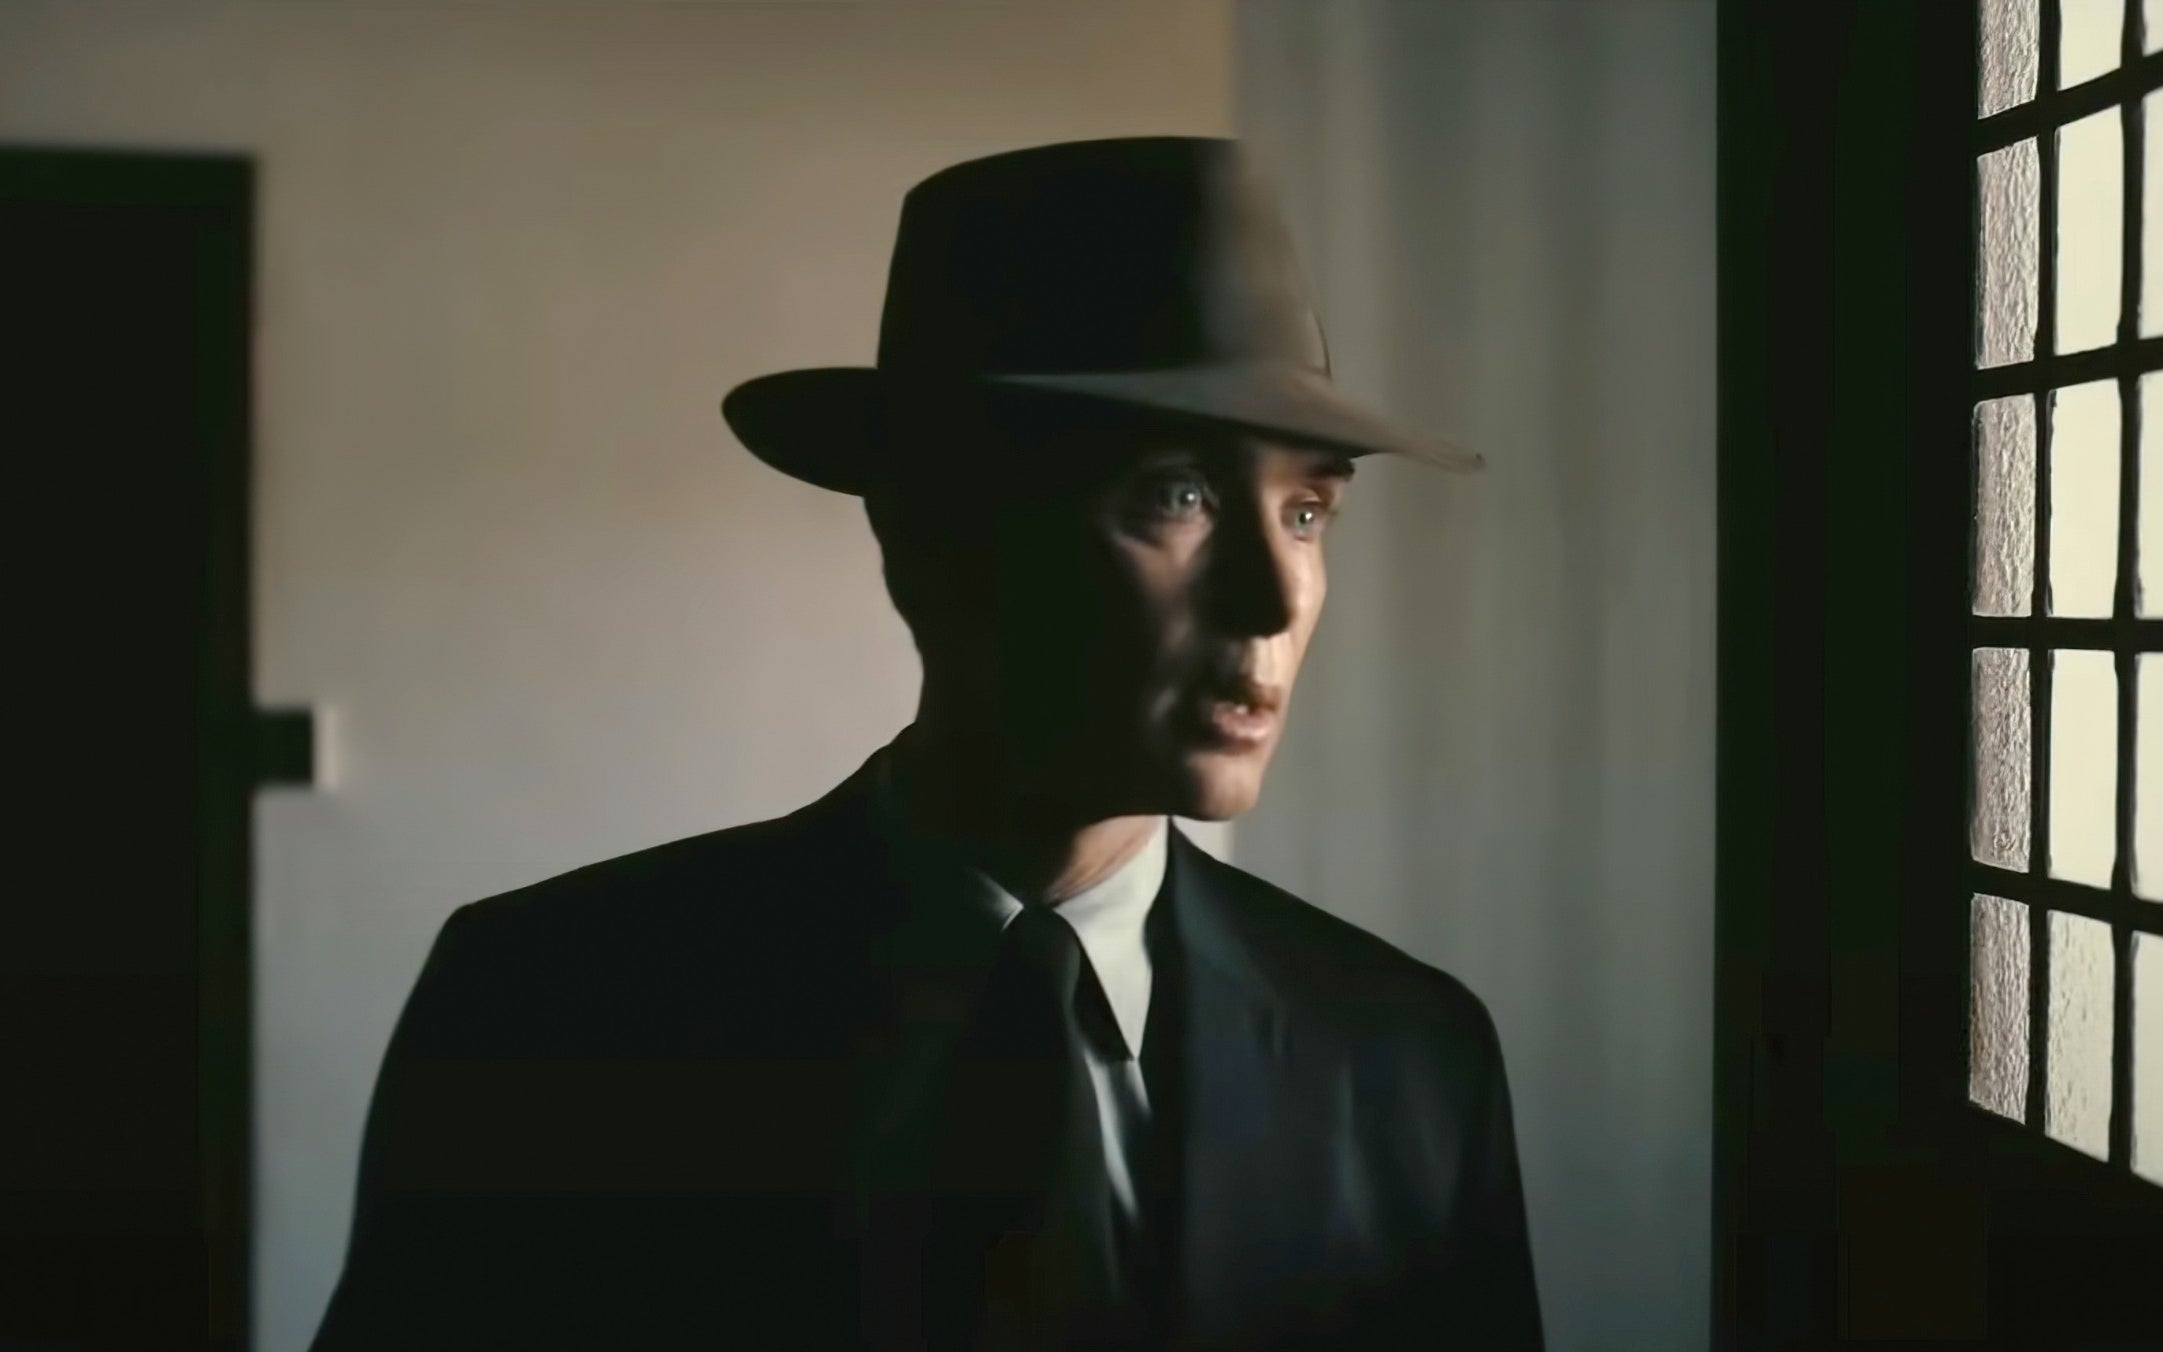 Cillian Murphy in a vintage suit and fedora hat stands in a dimly lit room